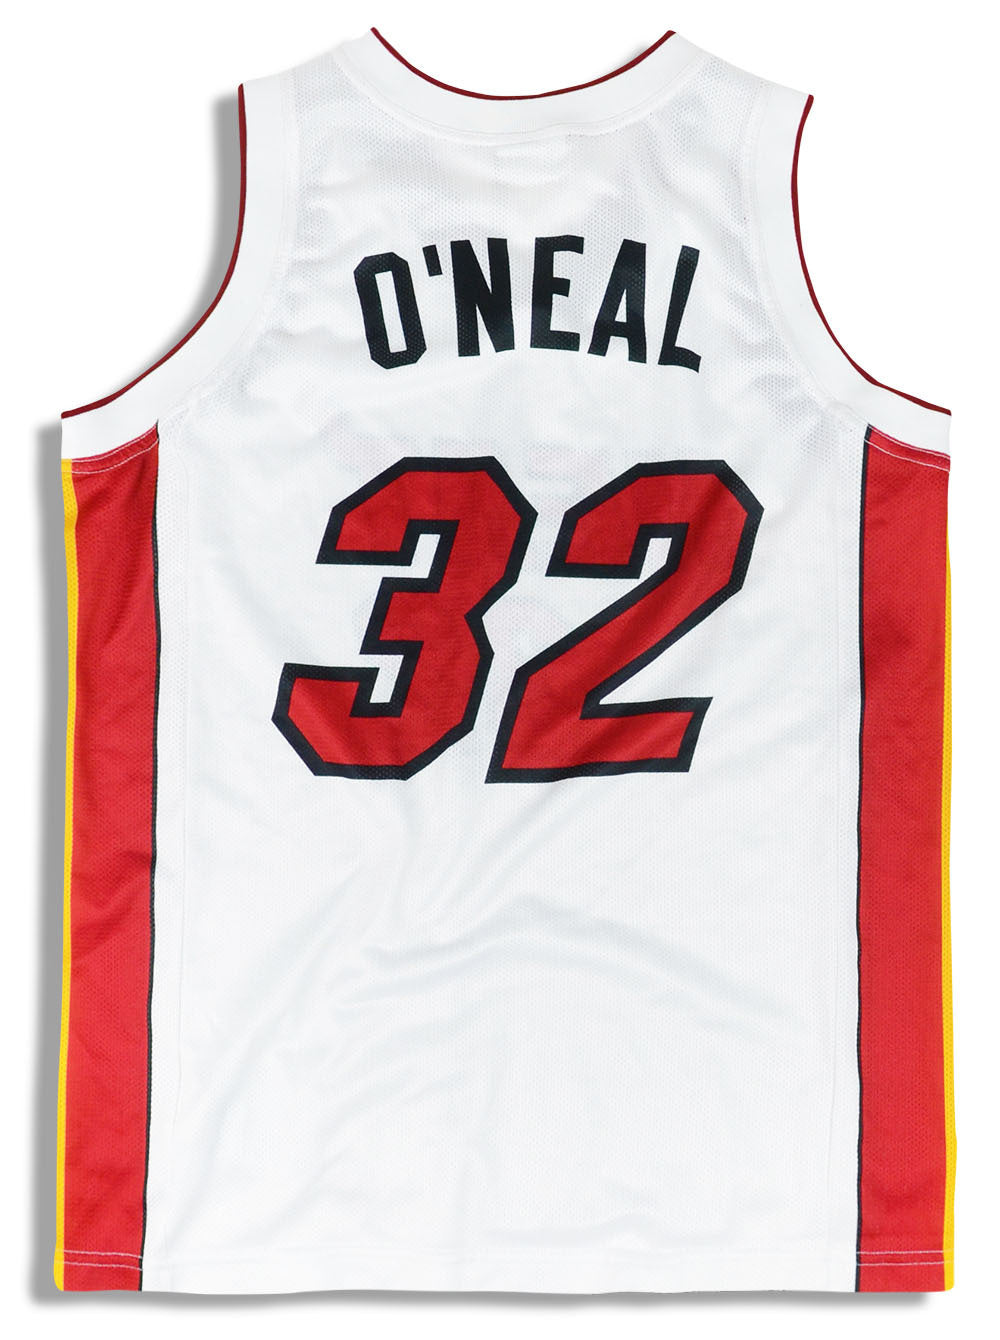 2004-07 MIAMI HEAT O’NEAL #32 CHAMPION JERSEY (HOME) Y